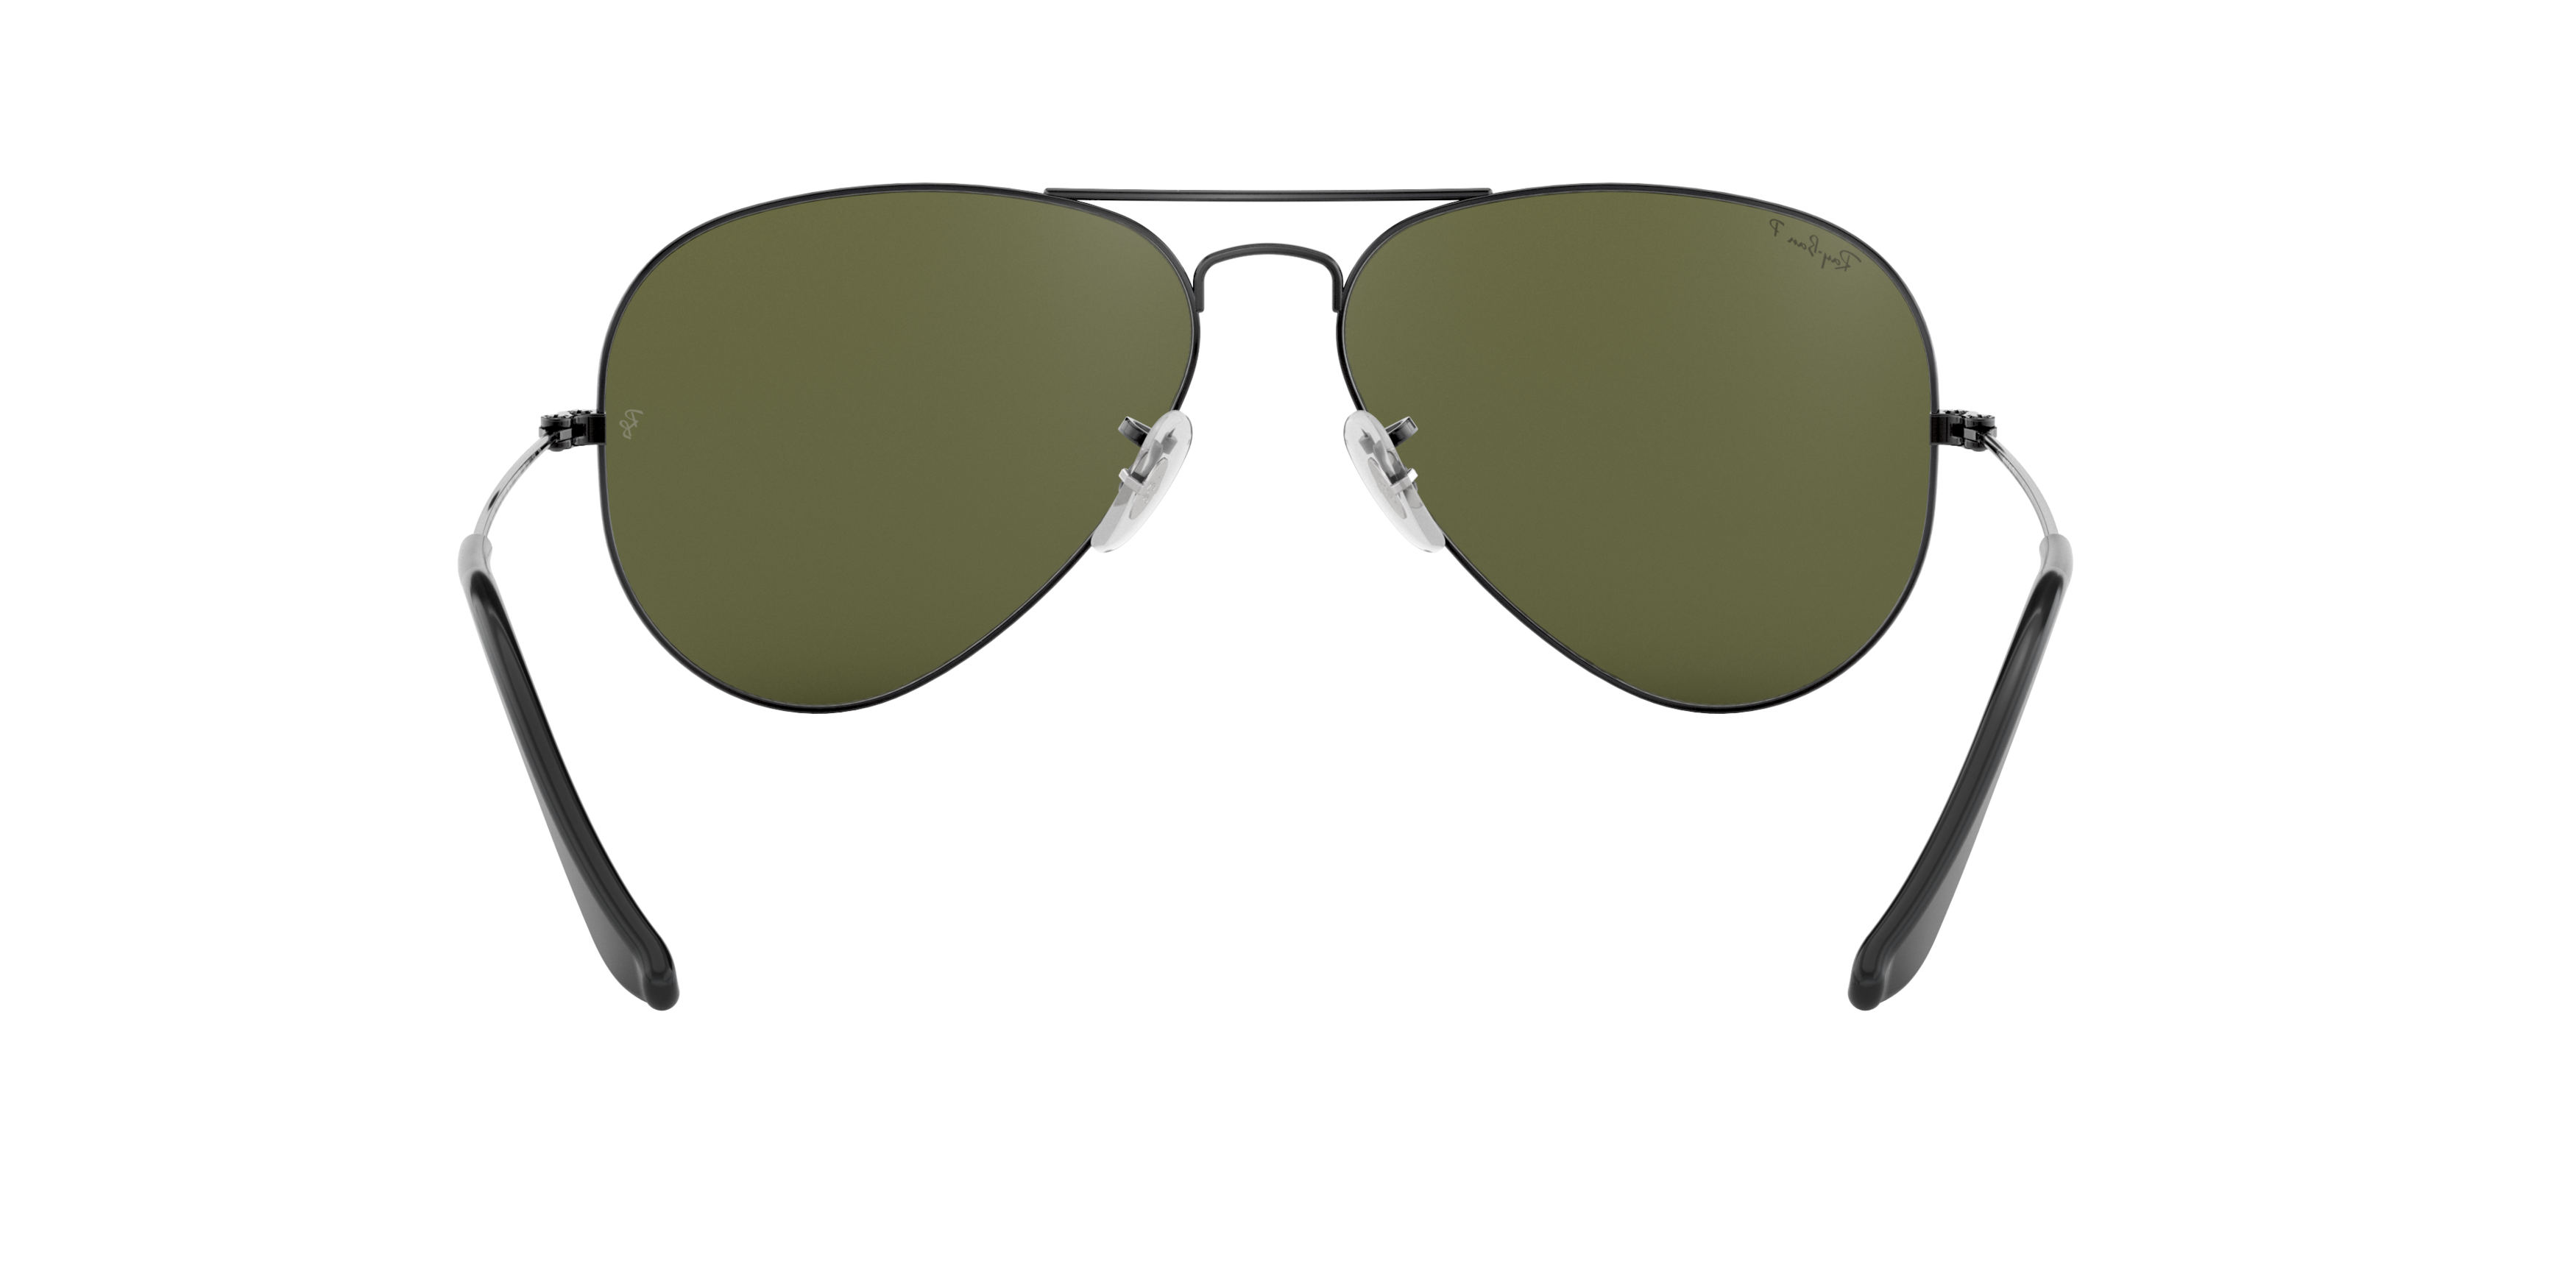 [products.image.detail02] Ray-Ban Aviator Classic